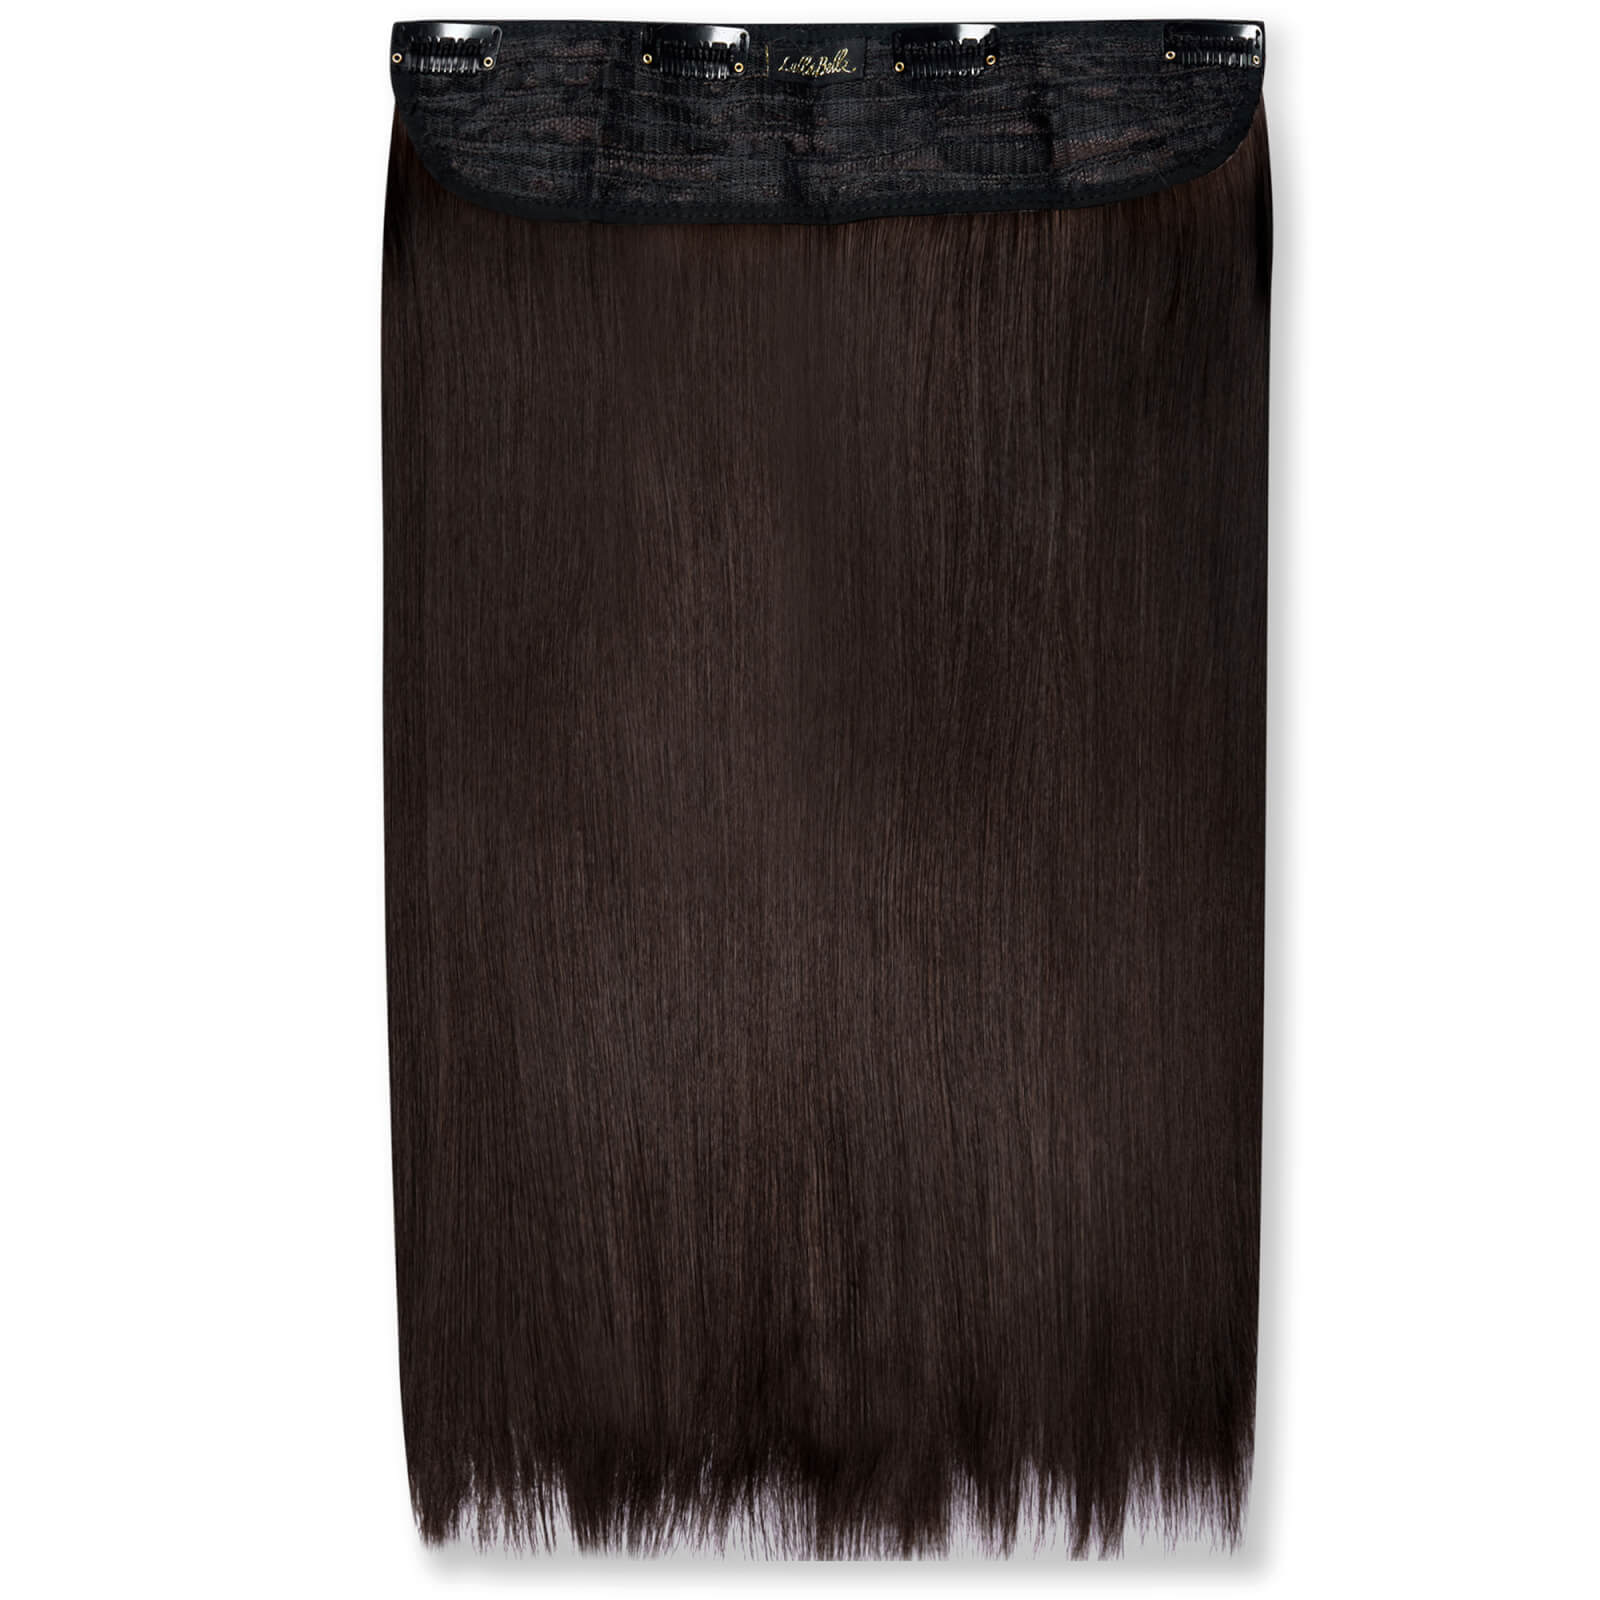 LullaBellz Thick 18 1-Piece Straight Clip in Hair Extensions (Various Colours) - Dark Brown